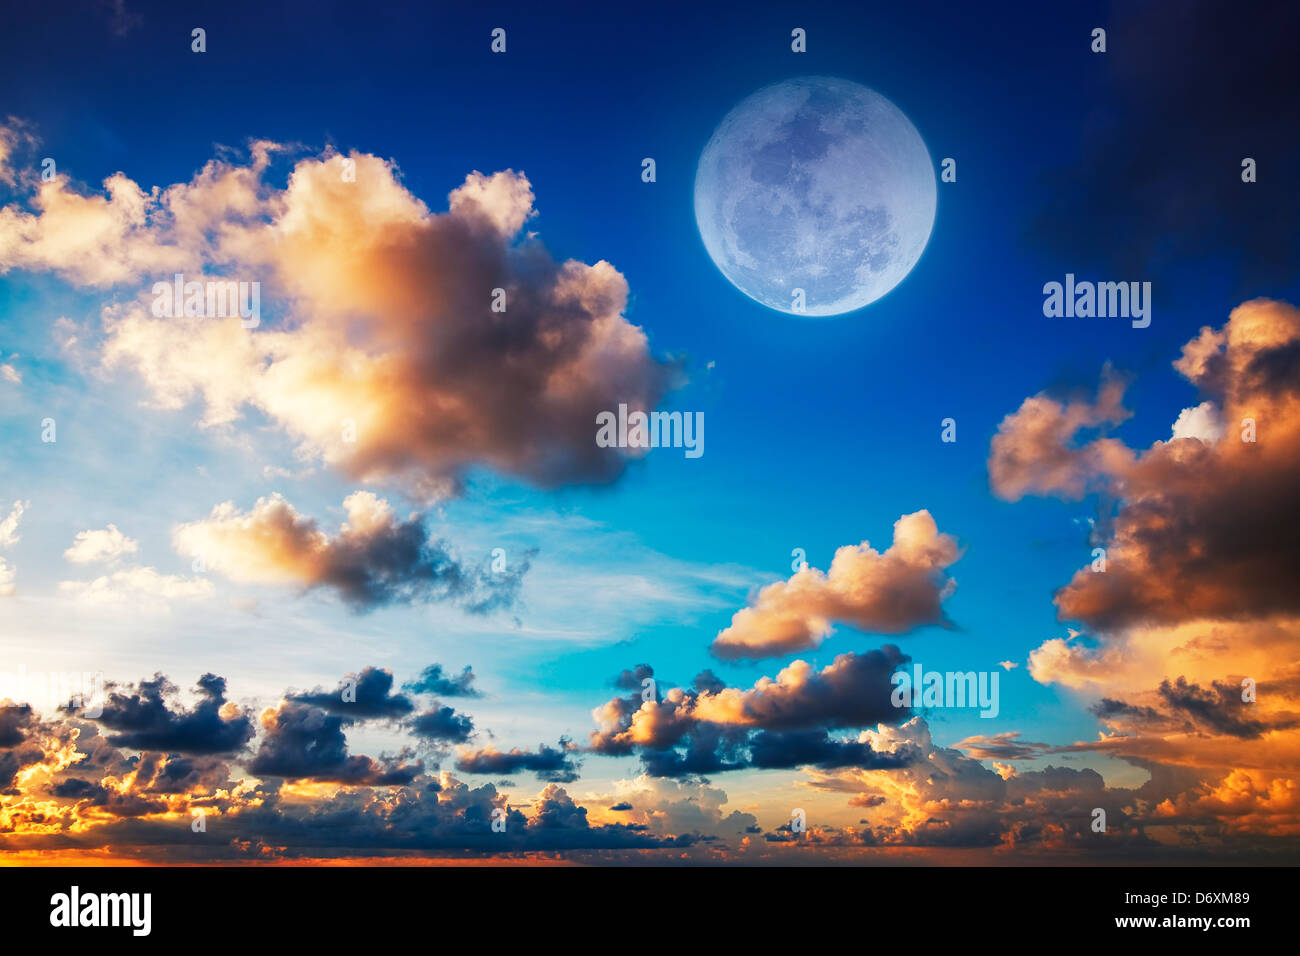 Sunset sky with a full moon Stock Photo